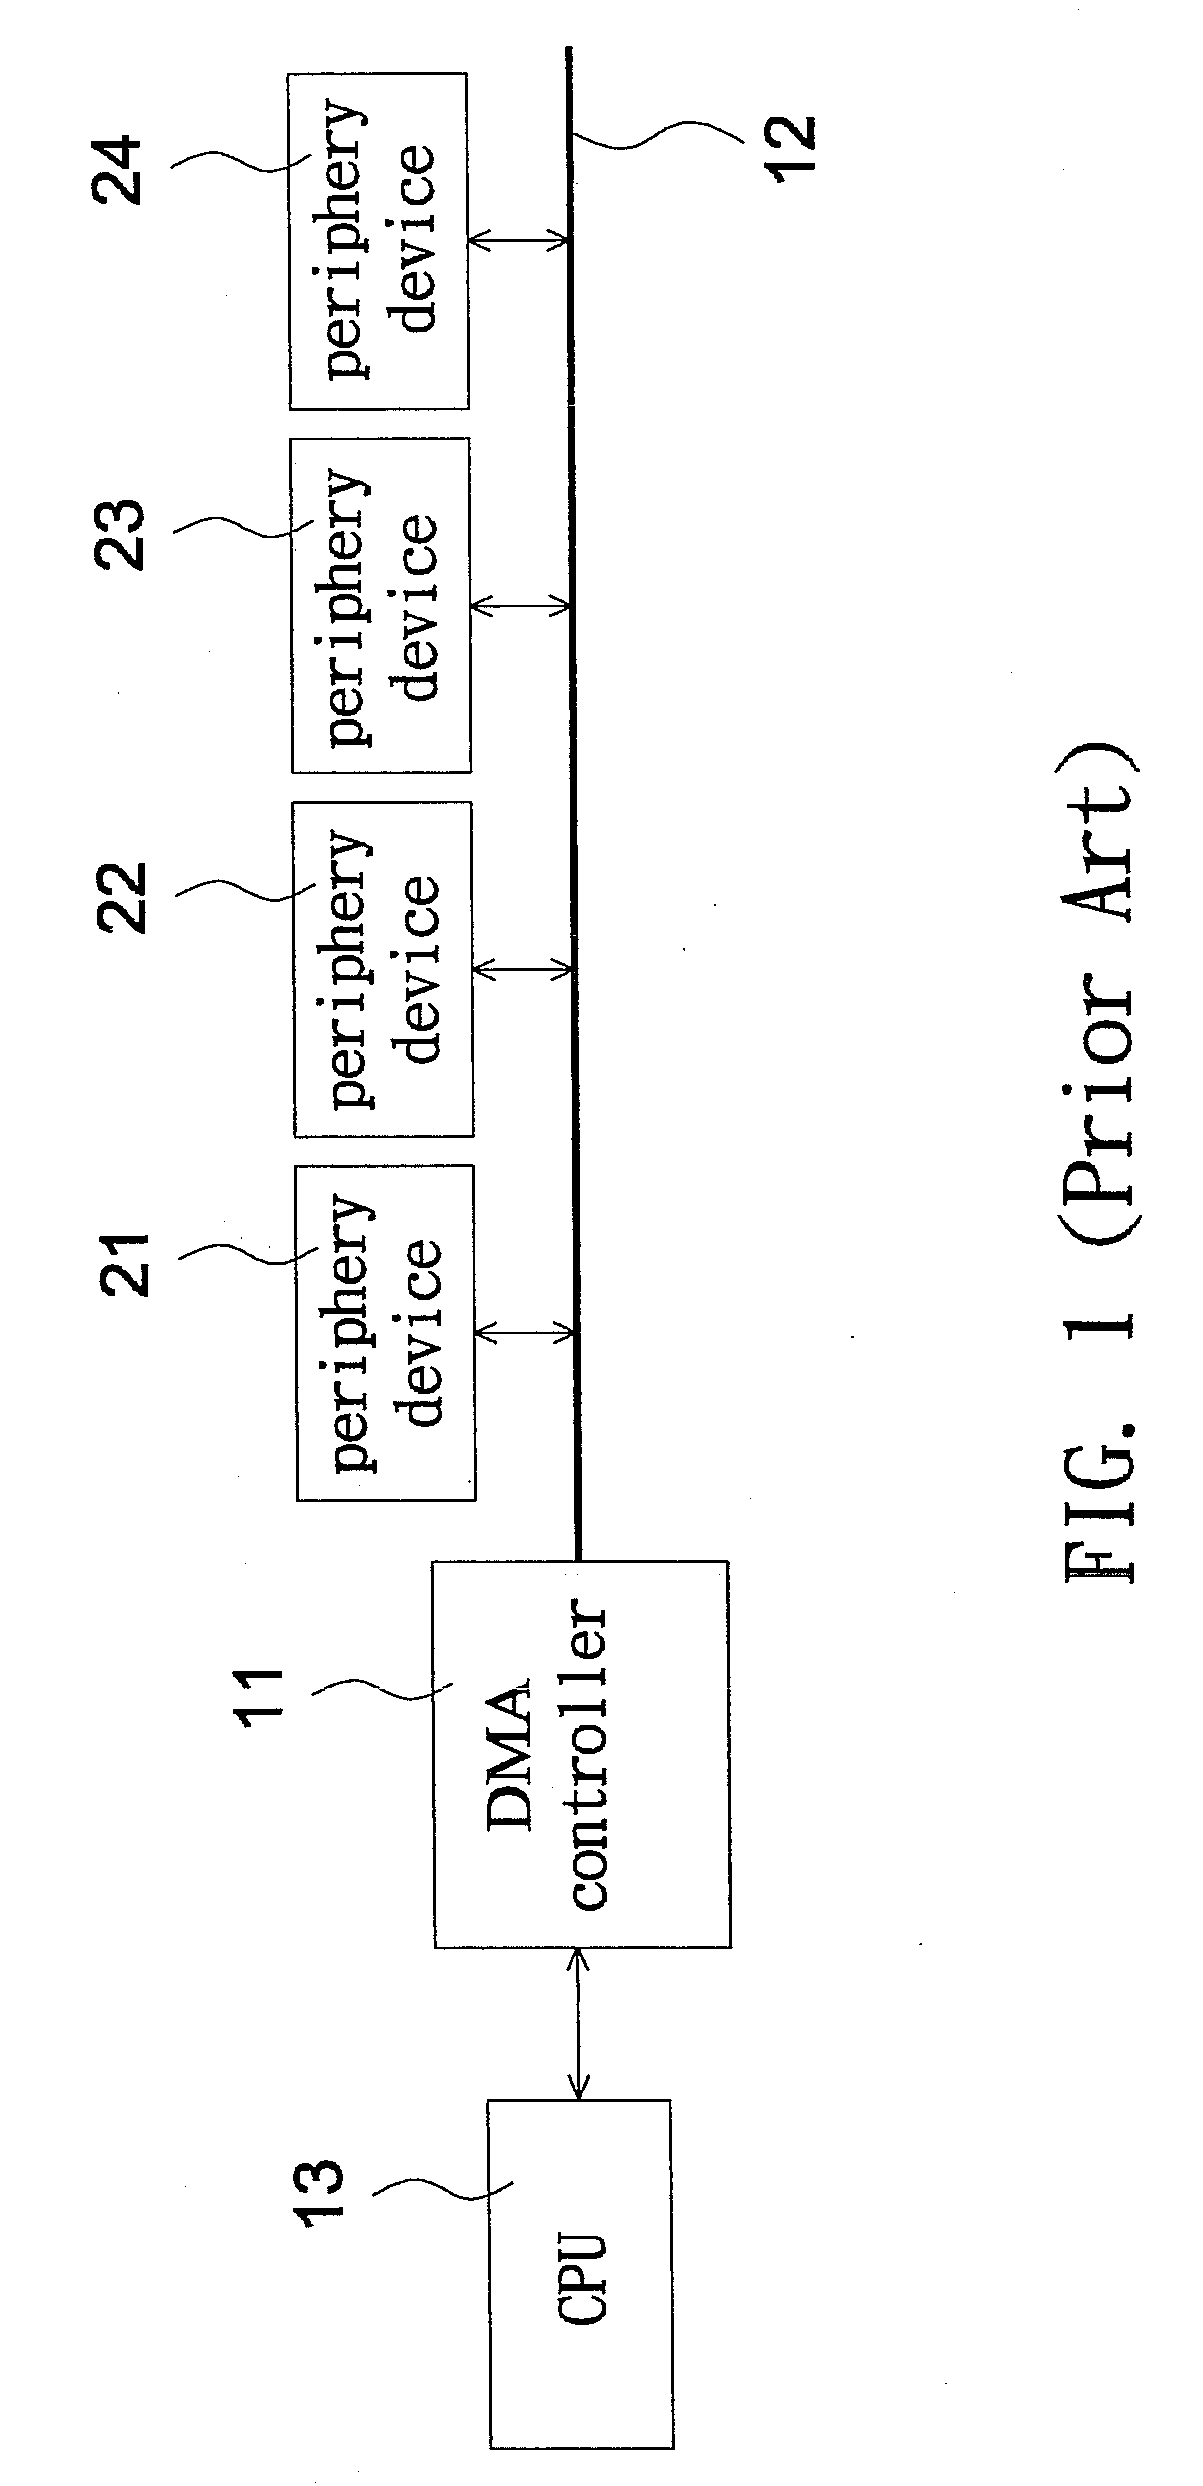 Direct memory access system and method